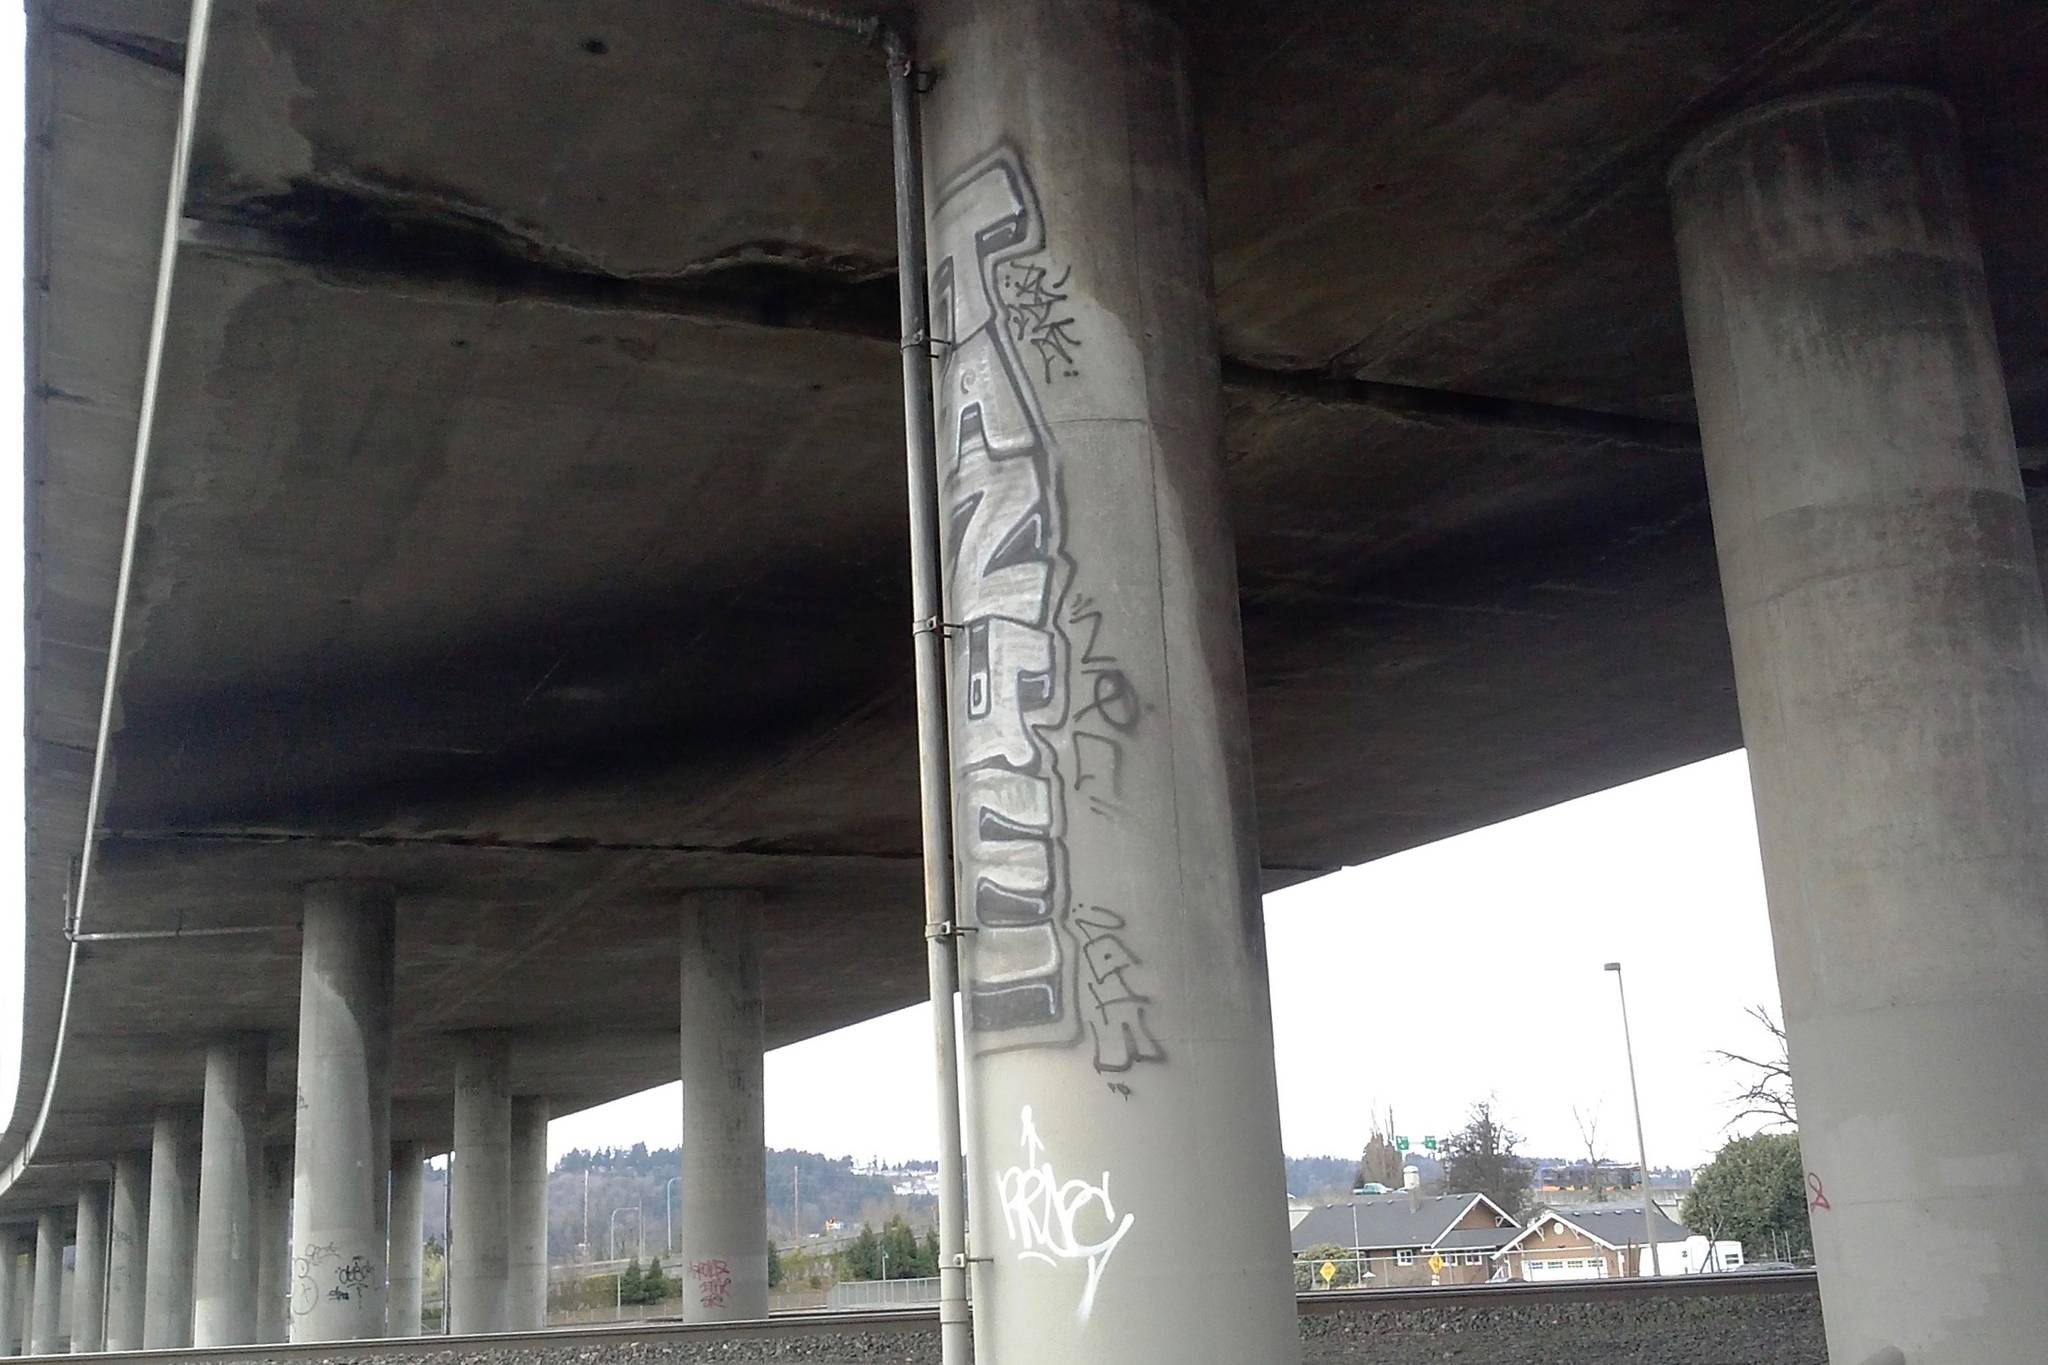 City Council to revisit graffiti issue